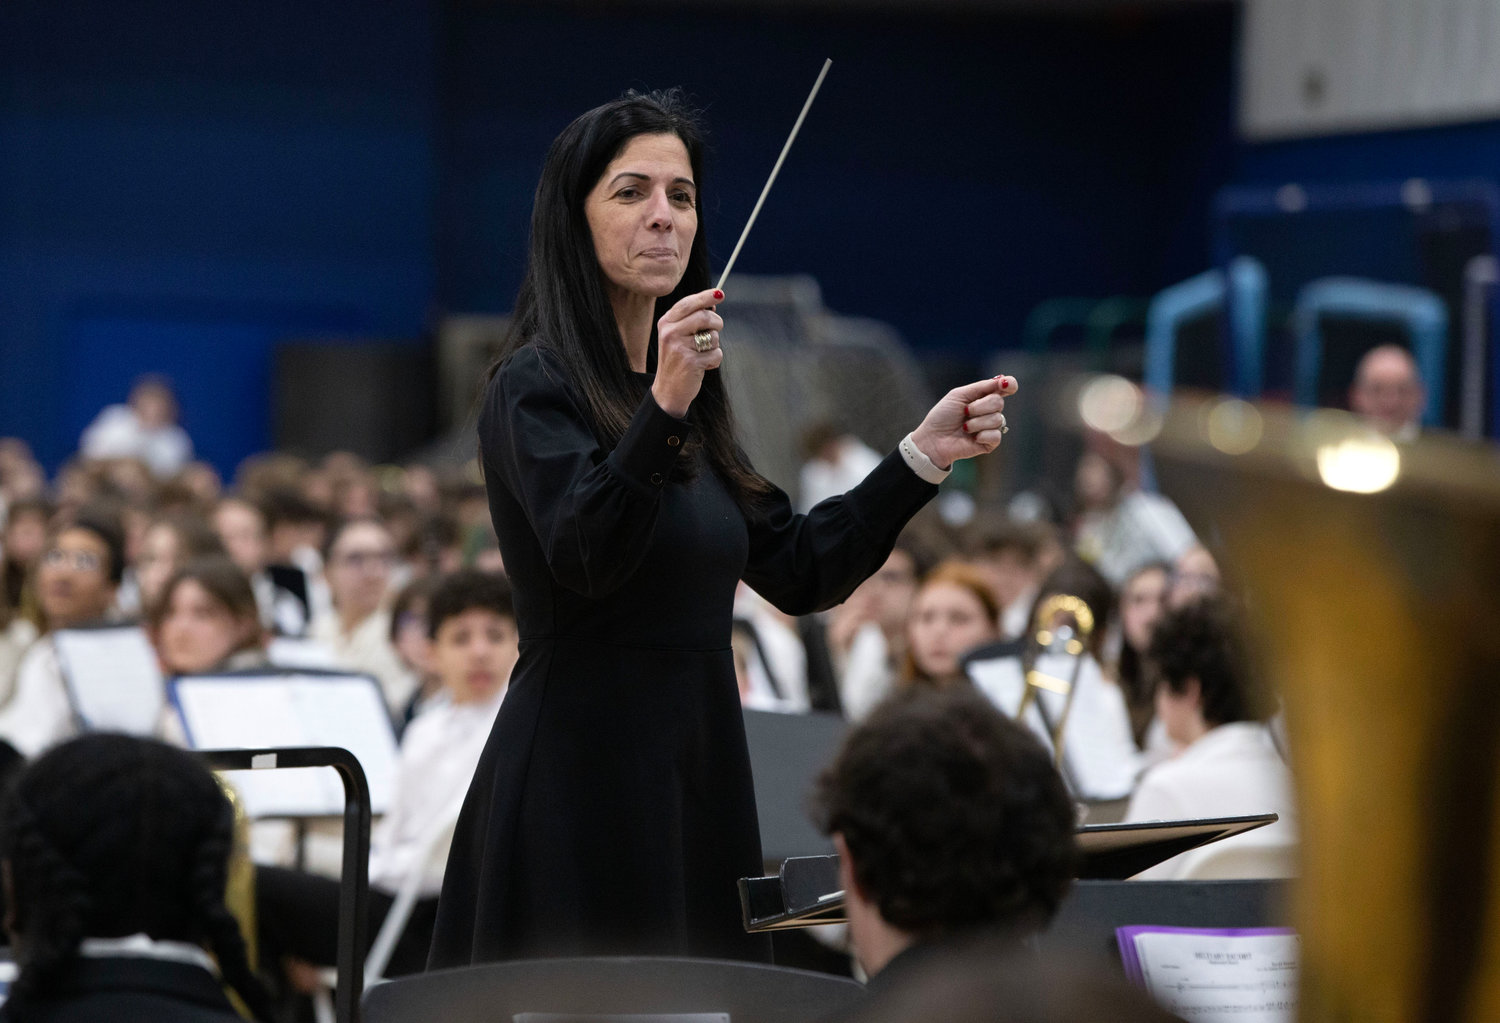 Superintendent Ana C. Riley performed as a special guest conductor for the high school band in Brian Balmages’ “Among the Clouds.”